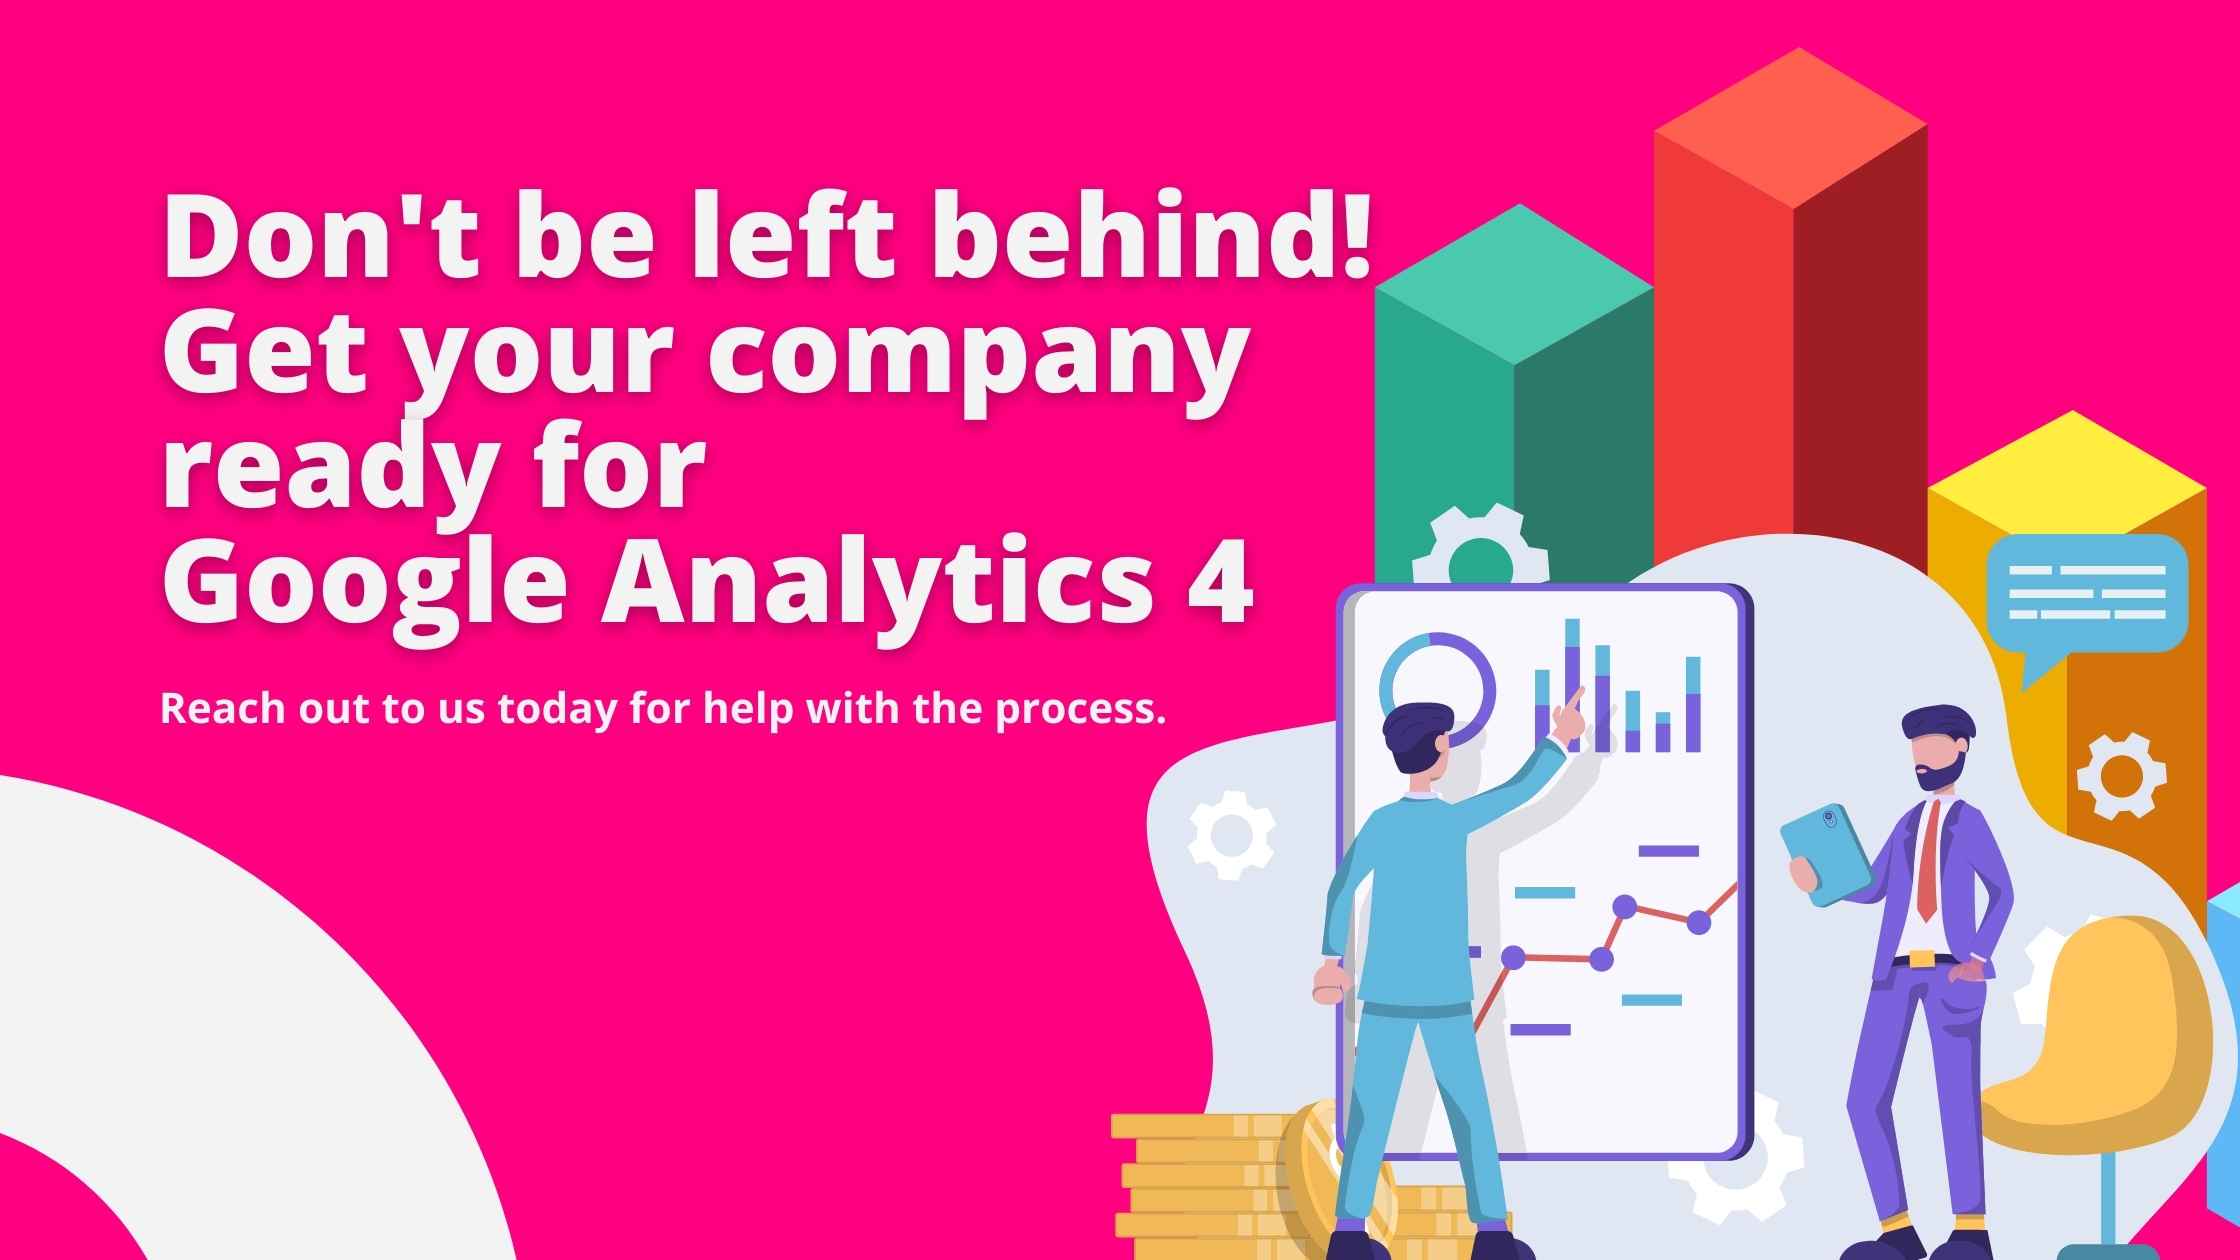 Don't be left behind! Get your company ready for Google Analytics 4